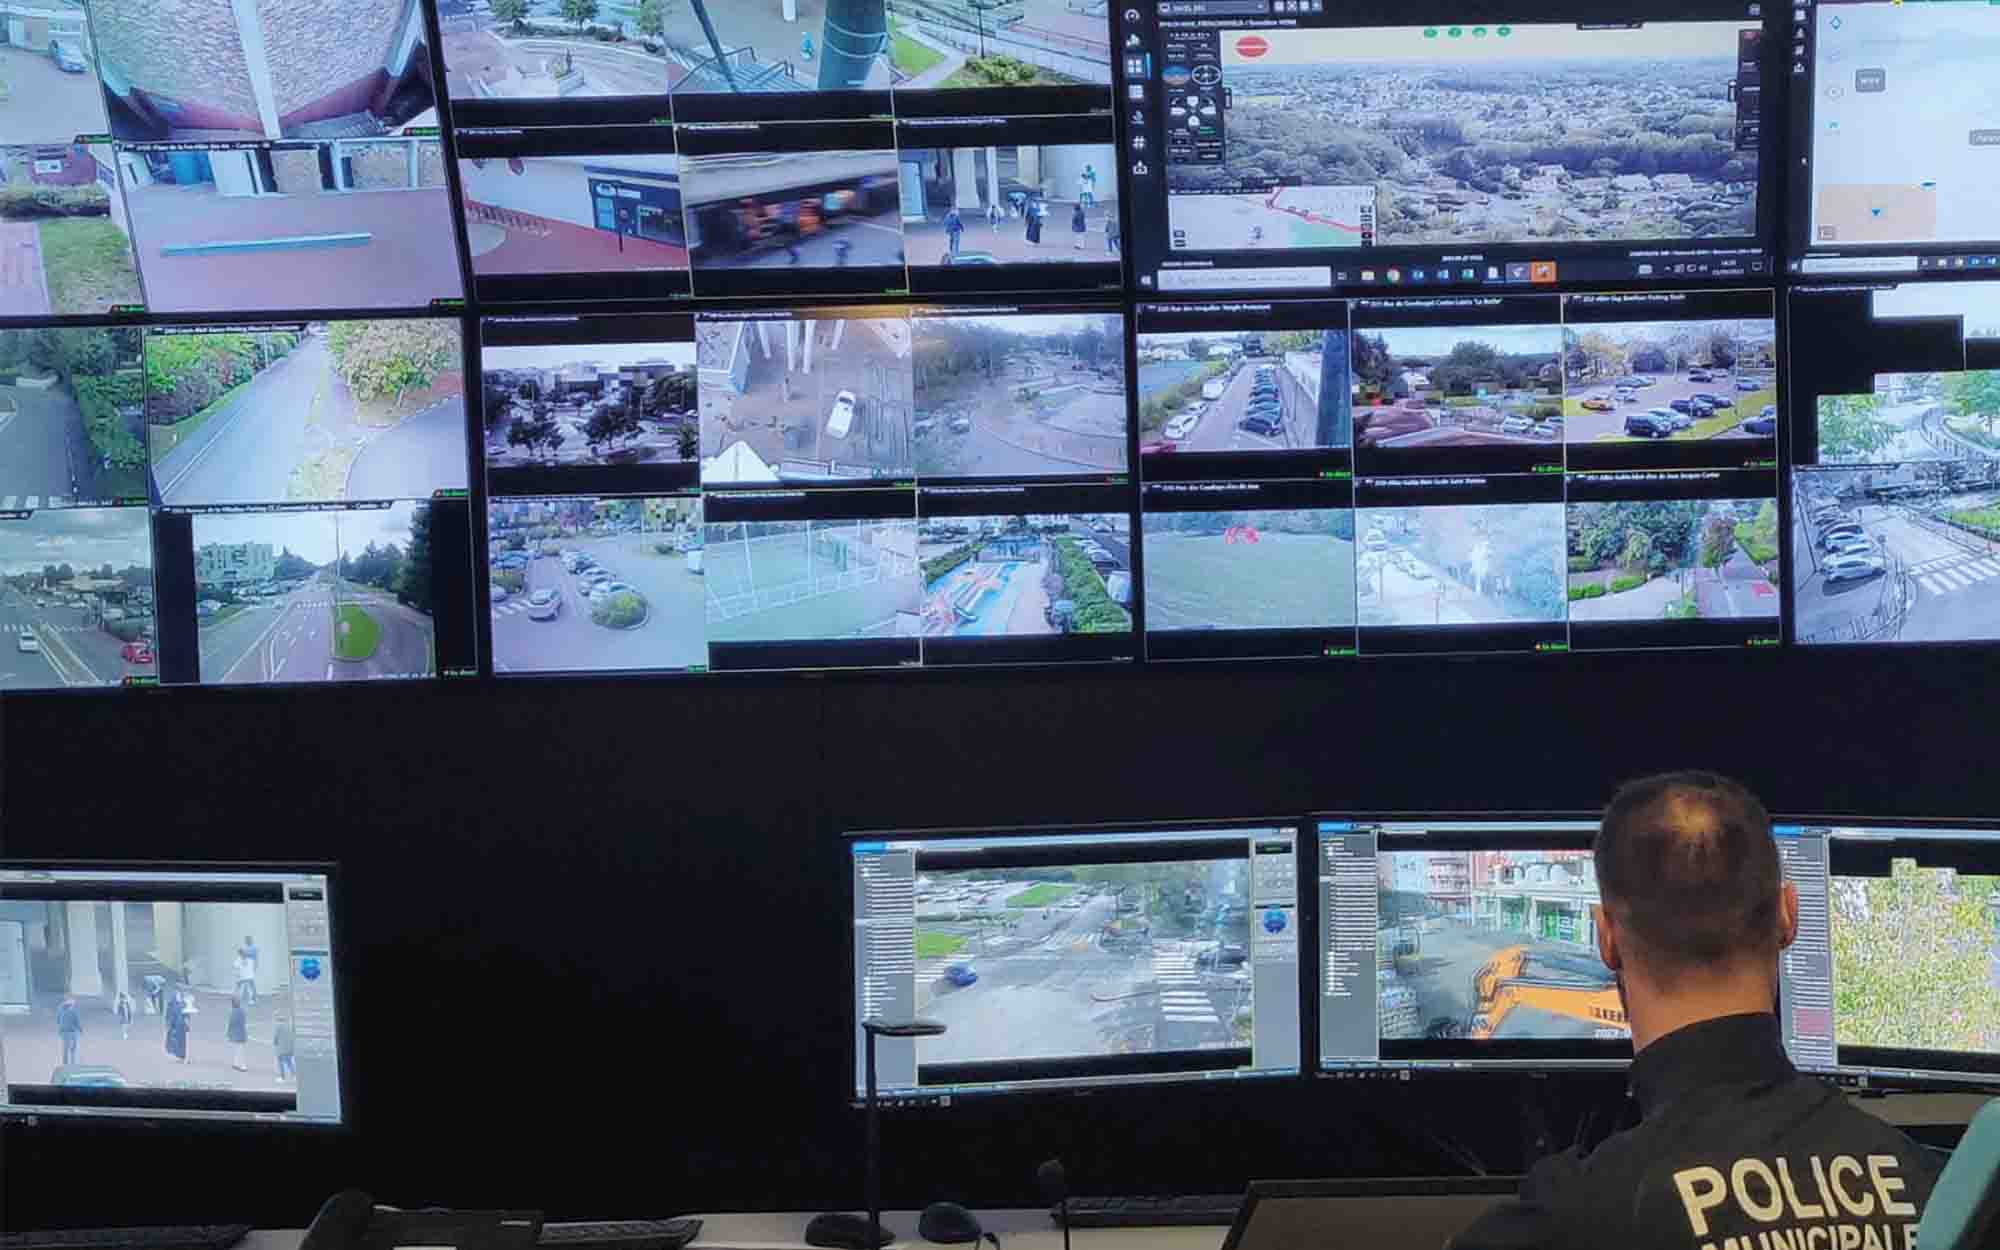 Surveillance system with multiple surveillance screens including a drone view